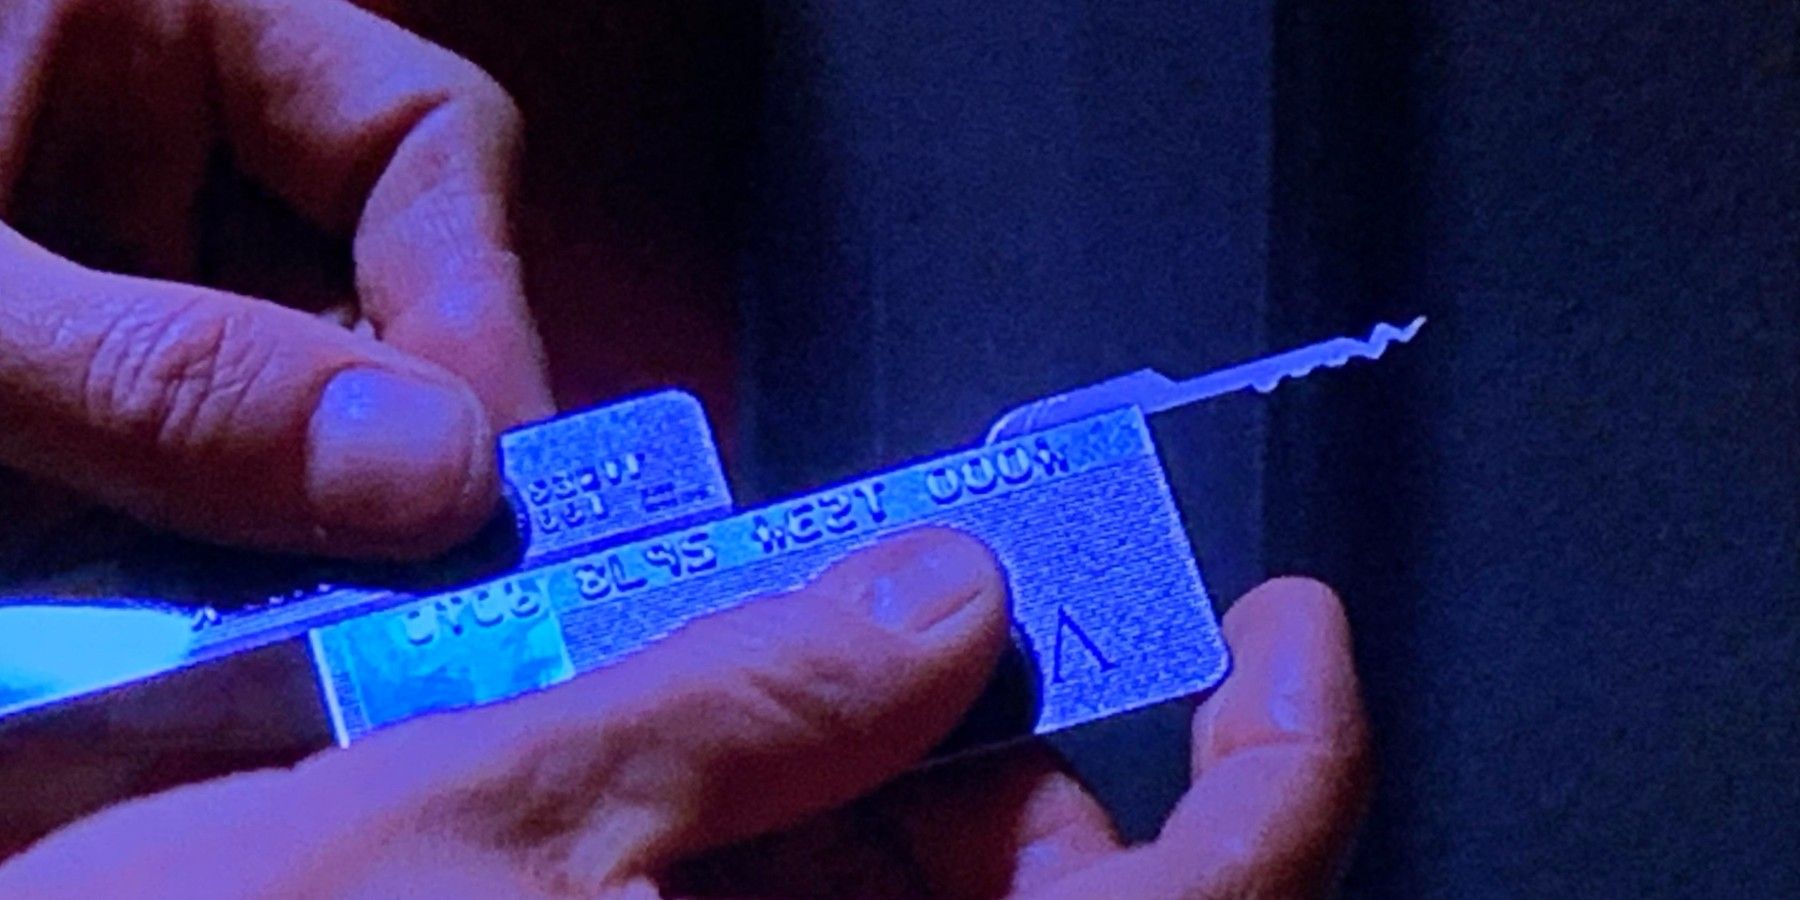 James Bond (Pierce Brosnan) unfolds his lockpick/skeleton key/master key disguised as a credit card in The World Is Not Enough.